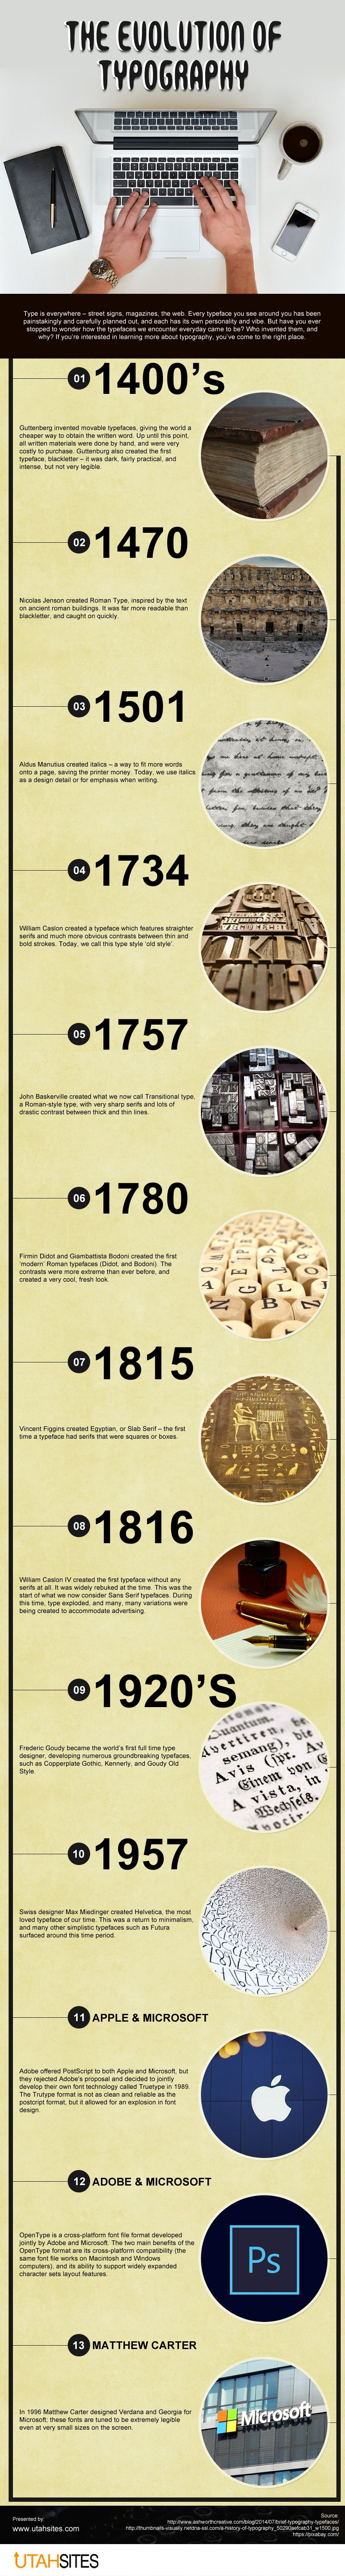 The Evolution of Typography [infographic]